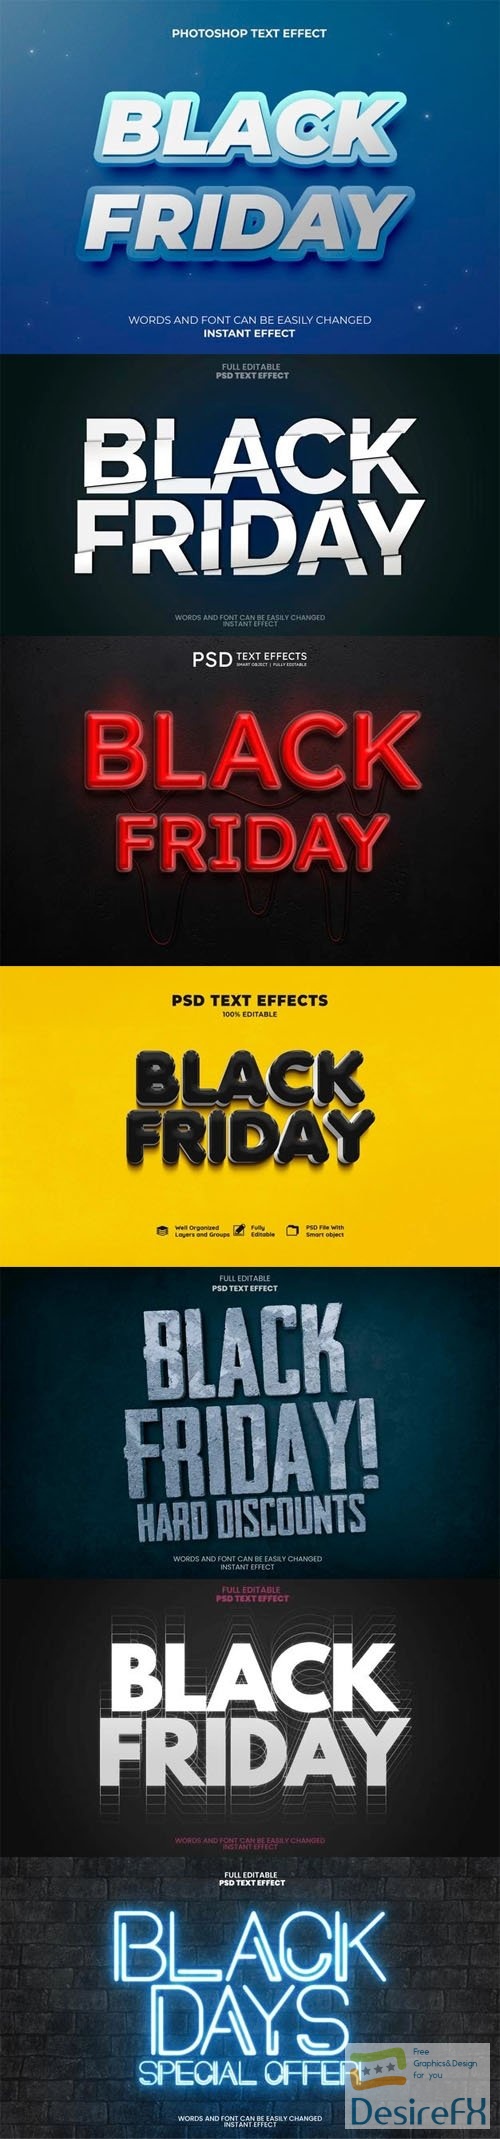 7 Black Friday Text Effects PSD Templates